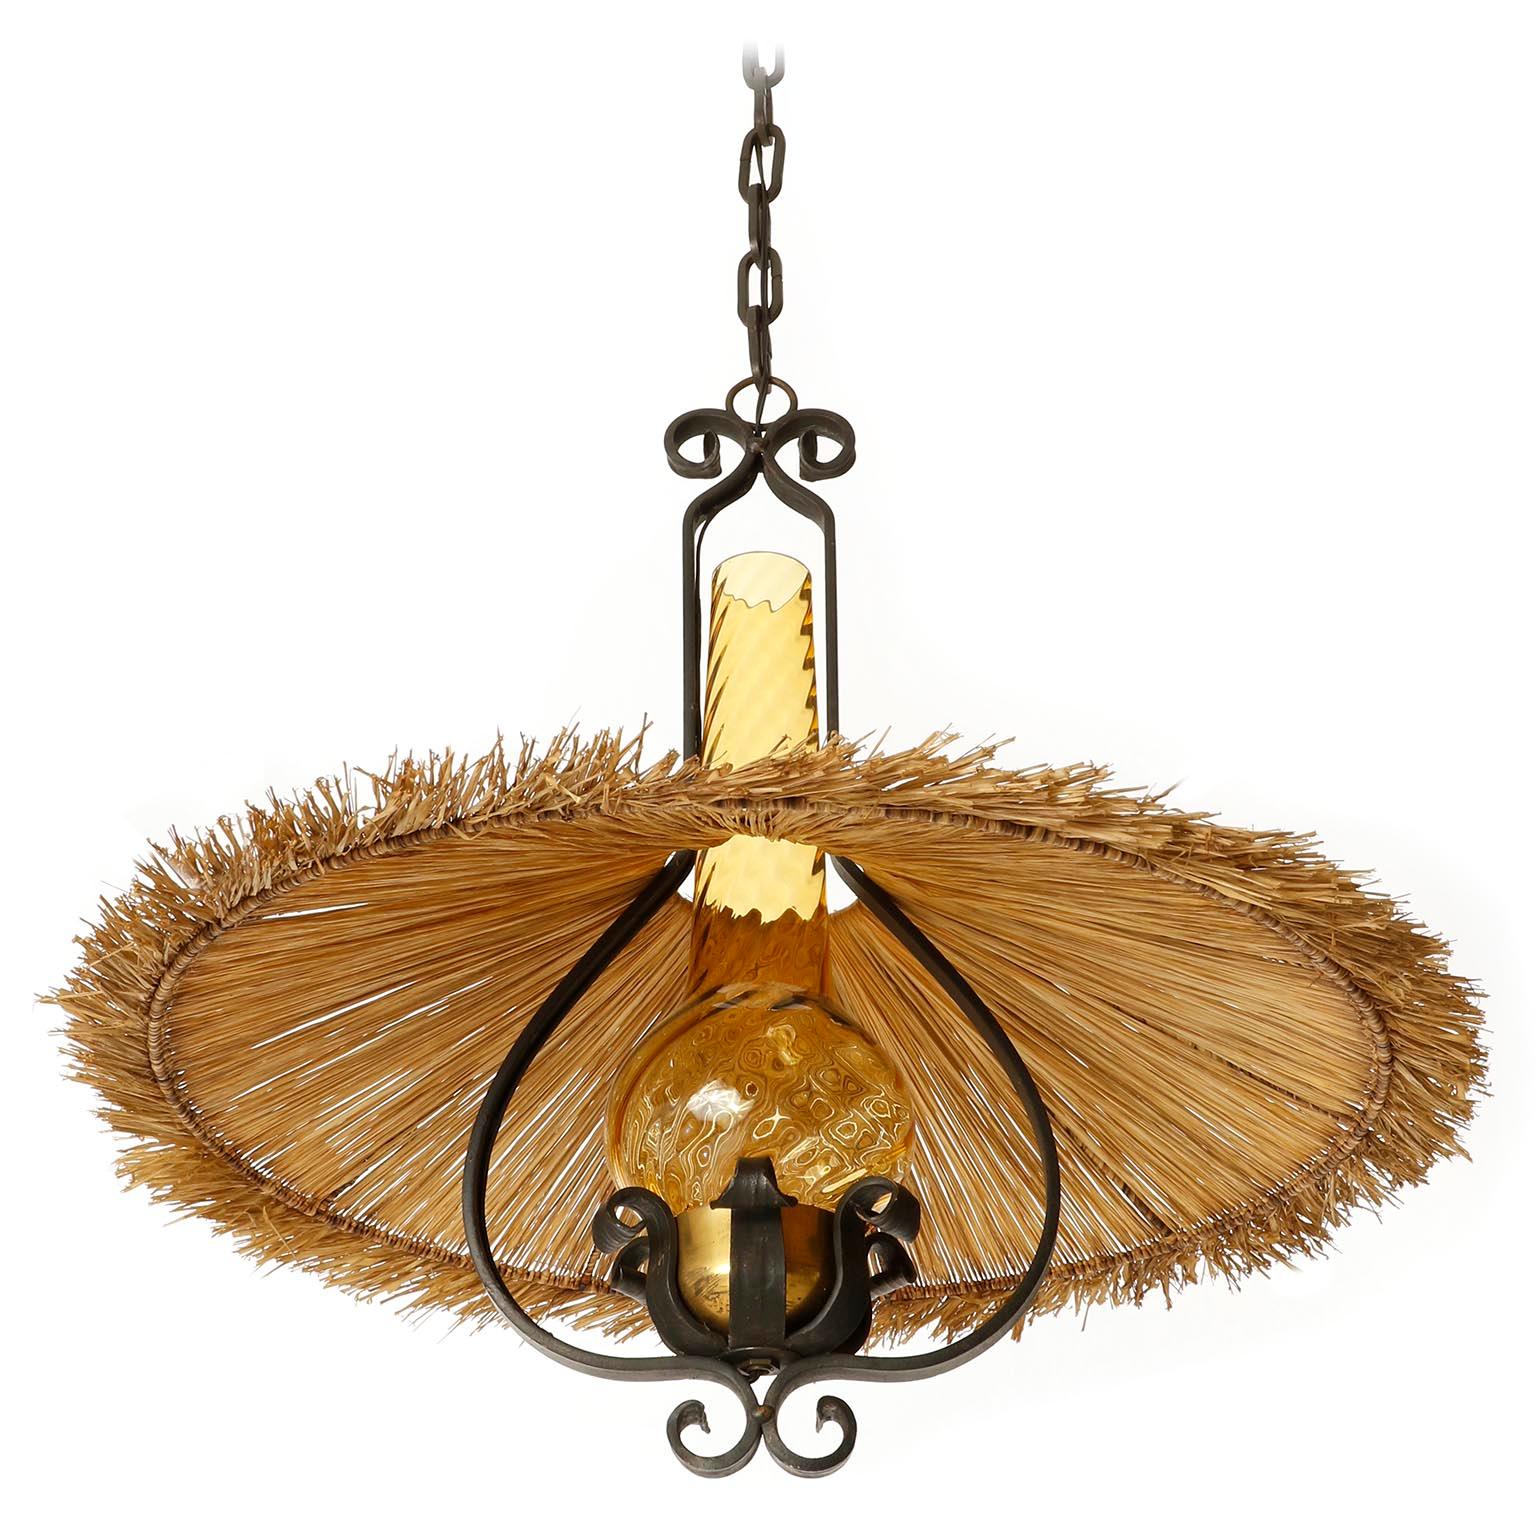 A pendant light manufactured in Austria in midcentury, circa 1960 (late 1950s or early 1960s).
It is made of nice mixture of materials and colors: blackened wrought iron, naturally aged and patinated brass, an amber colored glass and a lamp shade